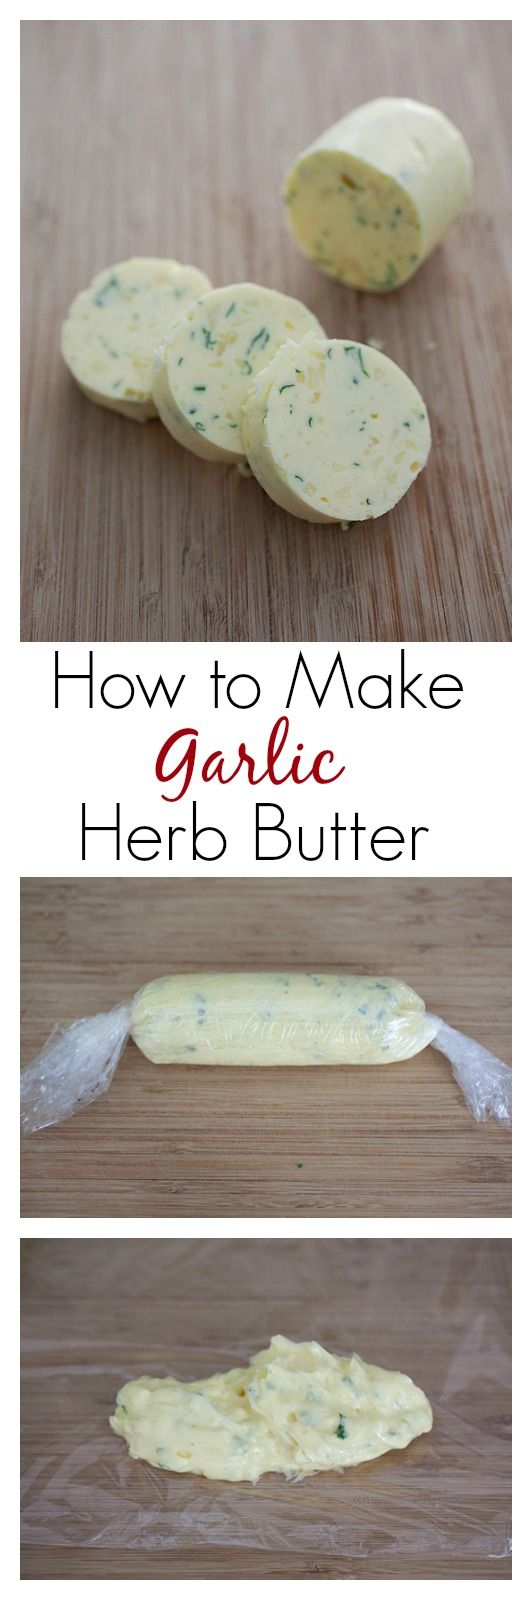 How to make Garlic Herb Butter. Learn the picture step-by-step, so easy to make and you can make so many dishes from it | rasamalaysia.com